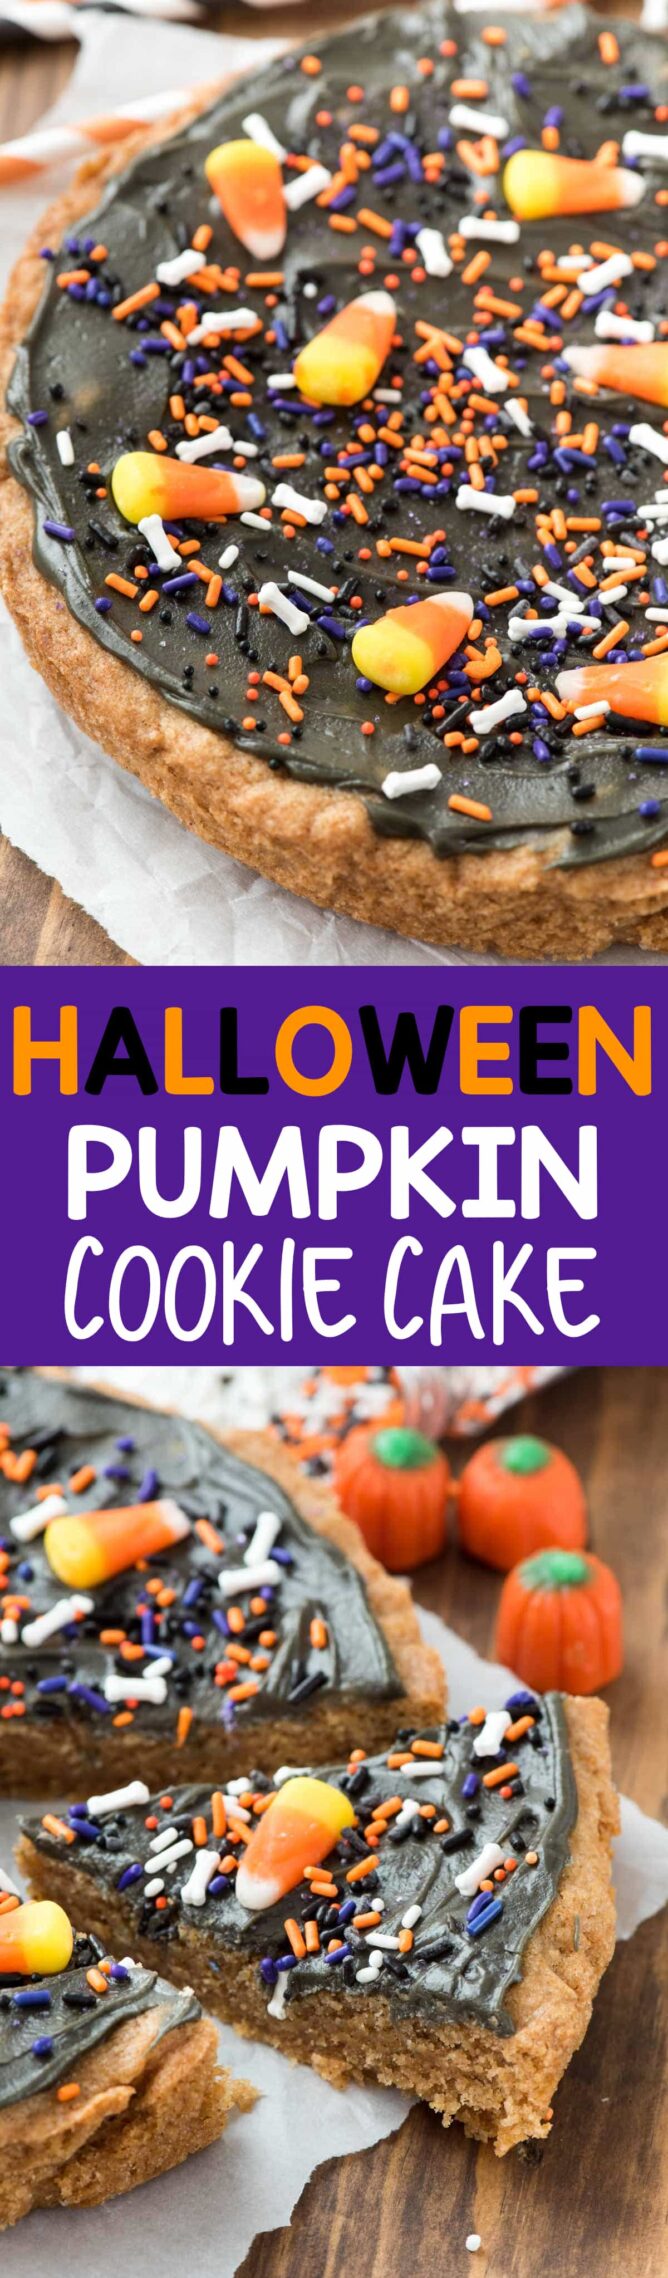 Two pic collage of Halloween Pumpkin Cookie Cake with graphics